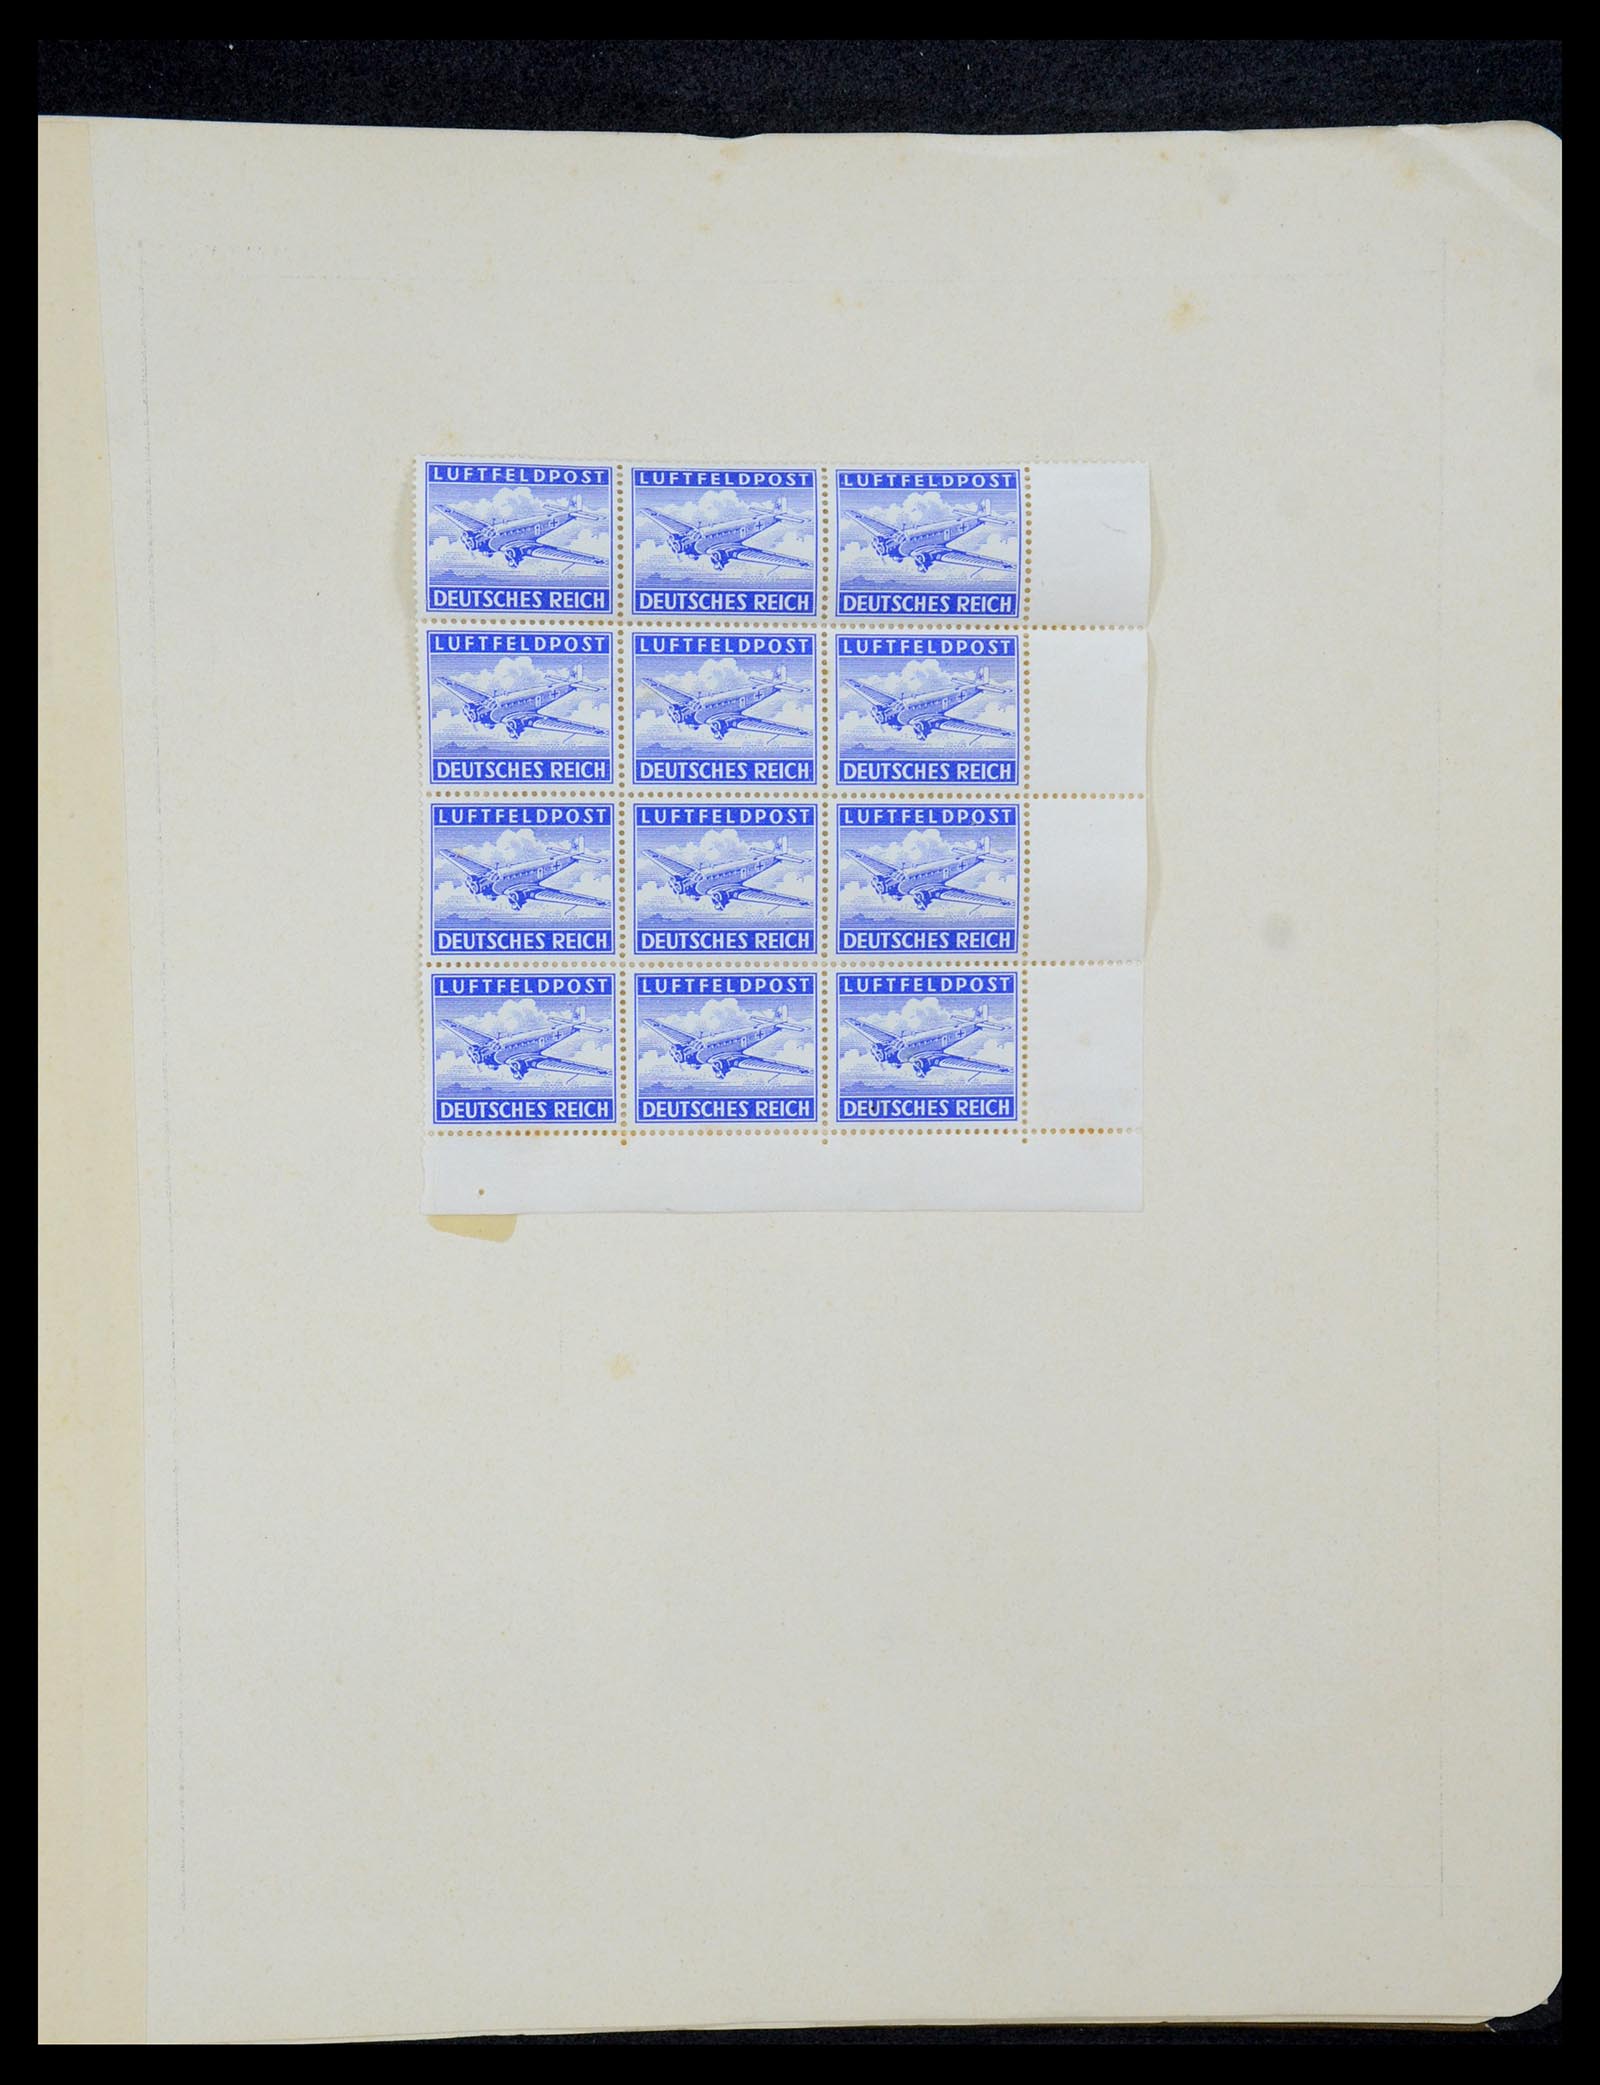 35270 092 - Stamp Collection 35270 German Reich combinations 1912-1941.